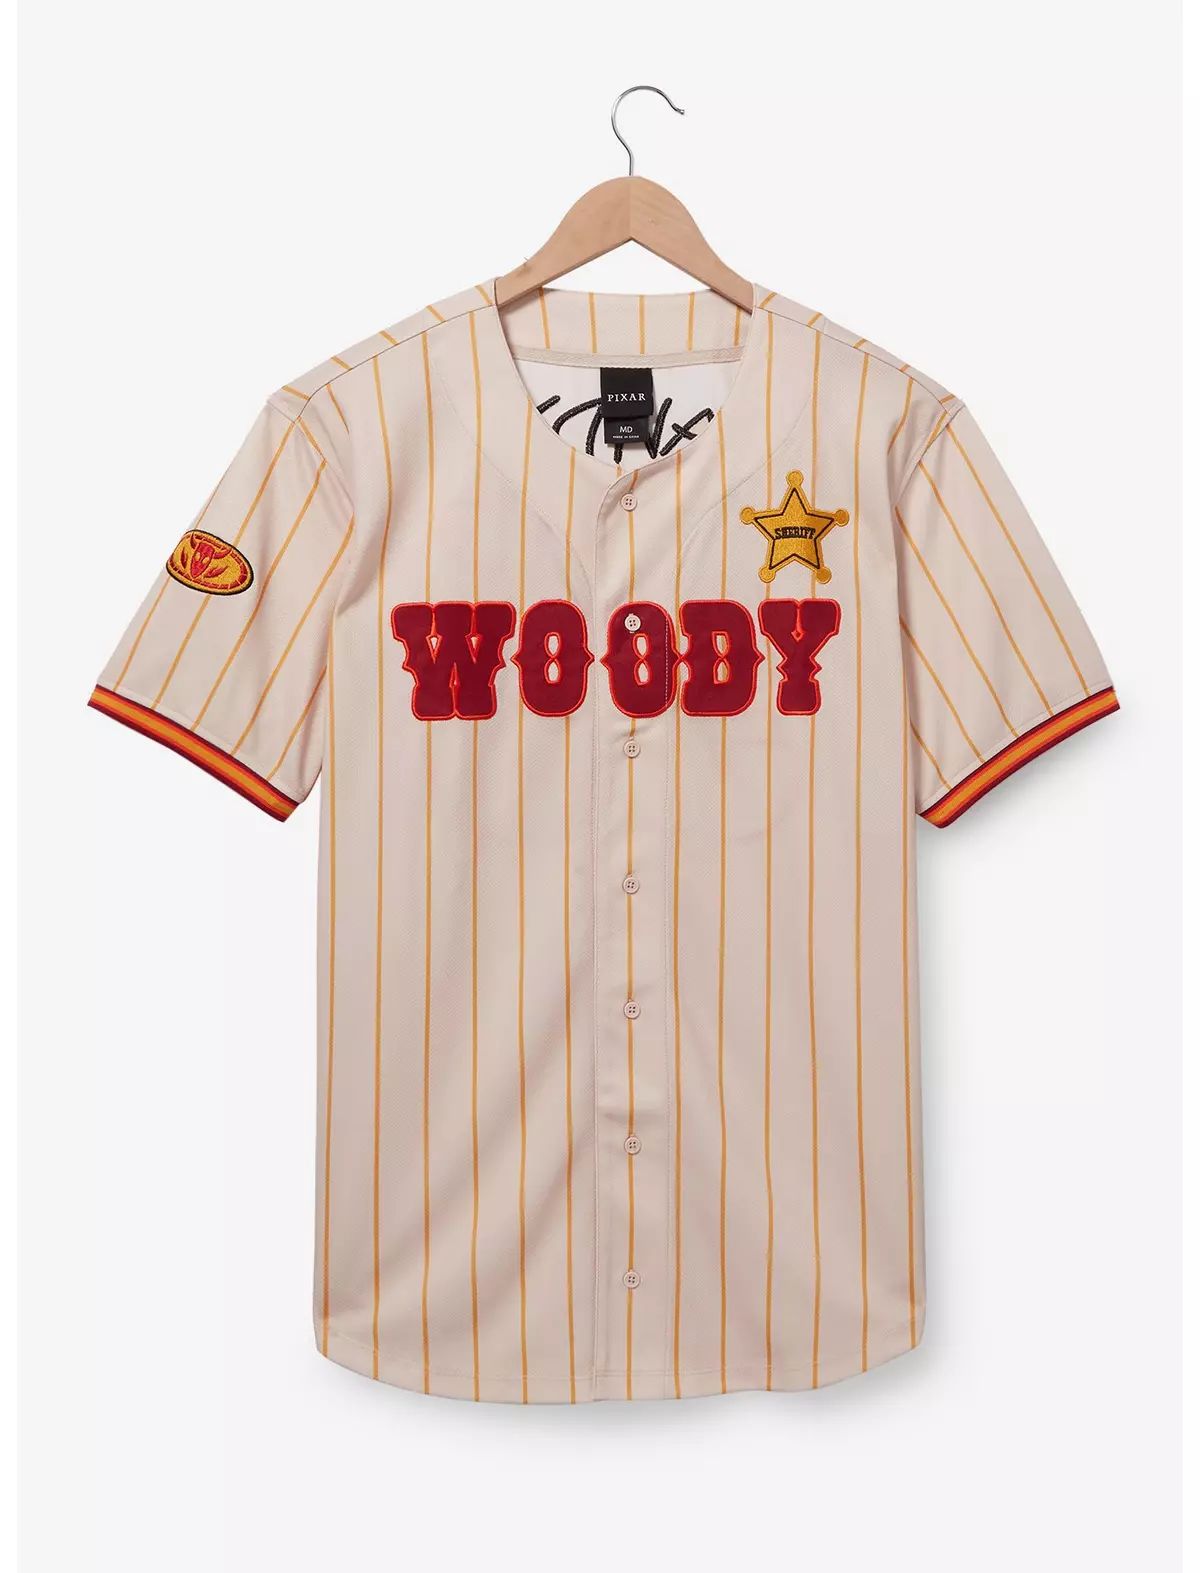 Disney Pixar Toy Story Woody Baseball Jersey — BoxLunch Exclusive | BoxLunch